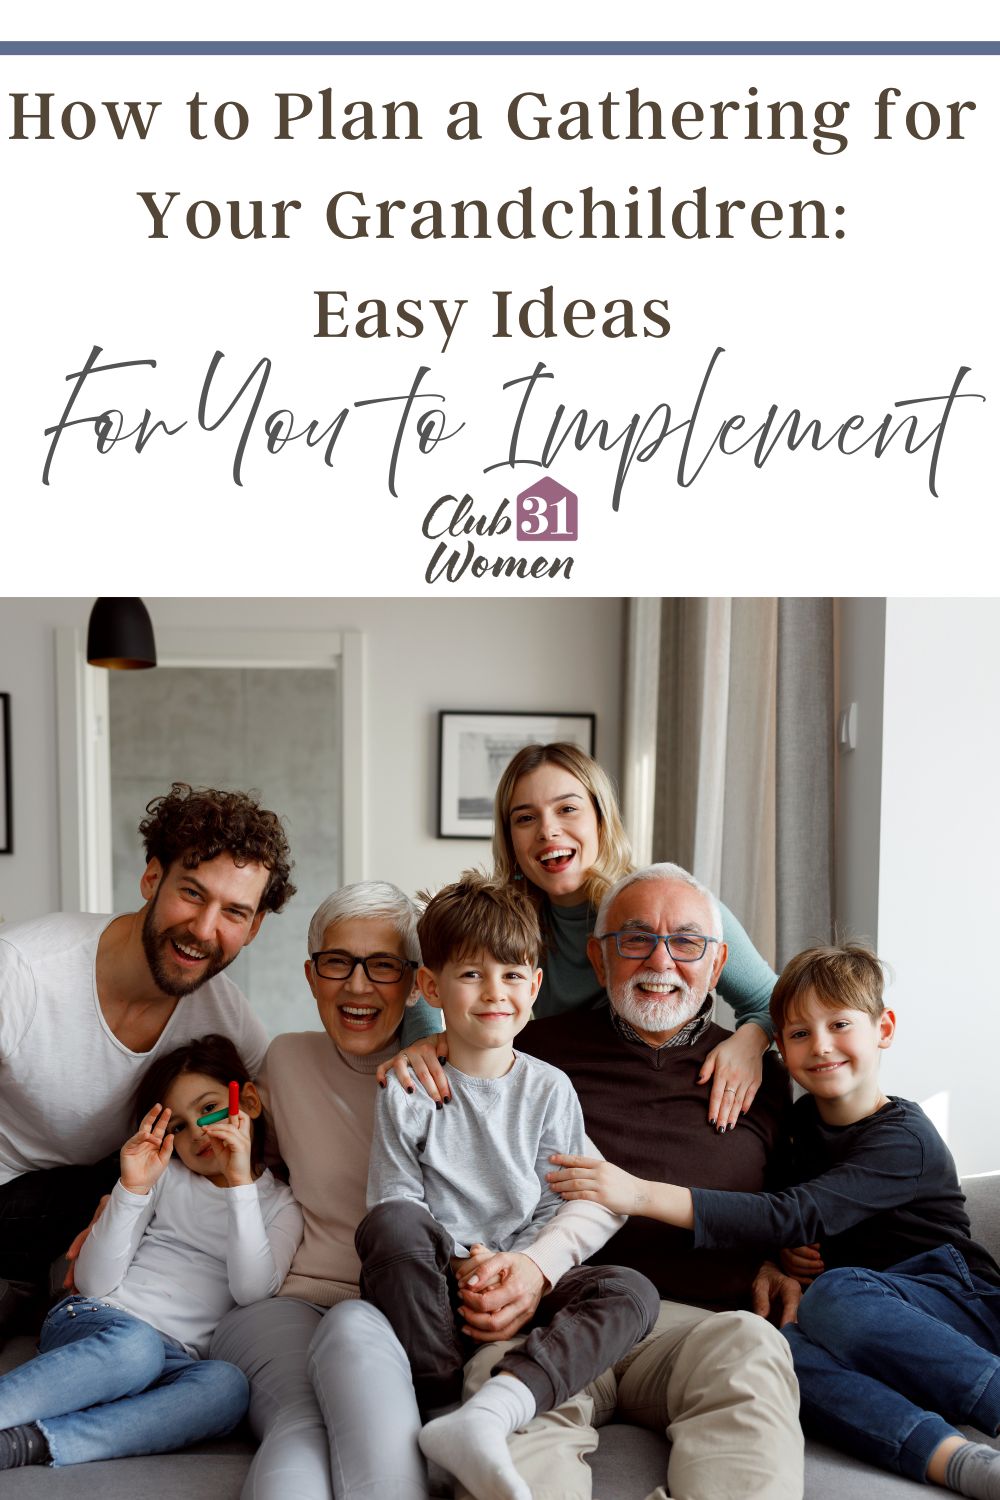 See what a blessing it is to gather your grandchildren together in one place for a fun time of relationship-building and great fun!! via @Club31Women